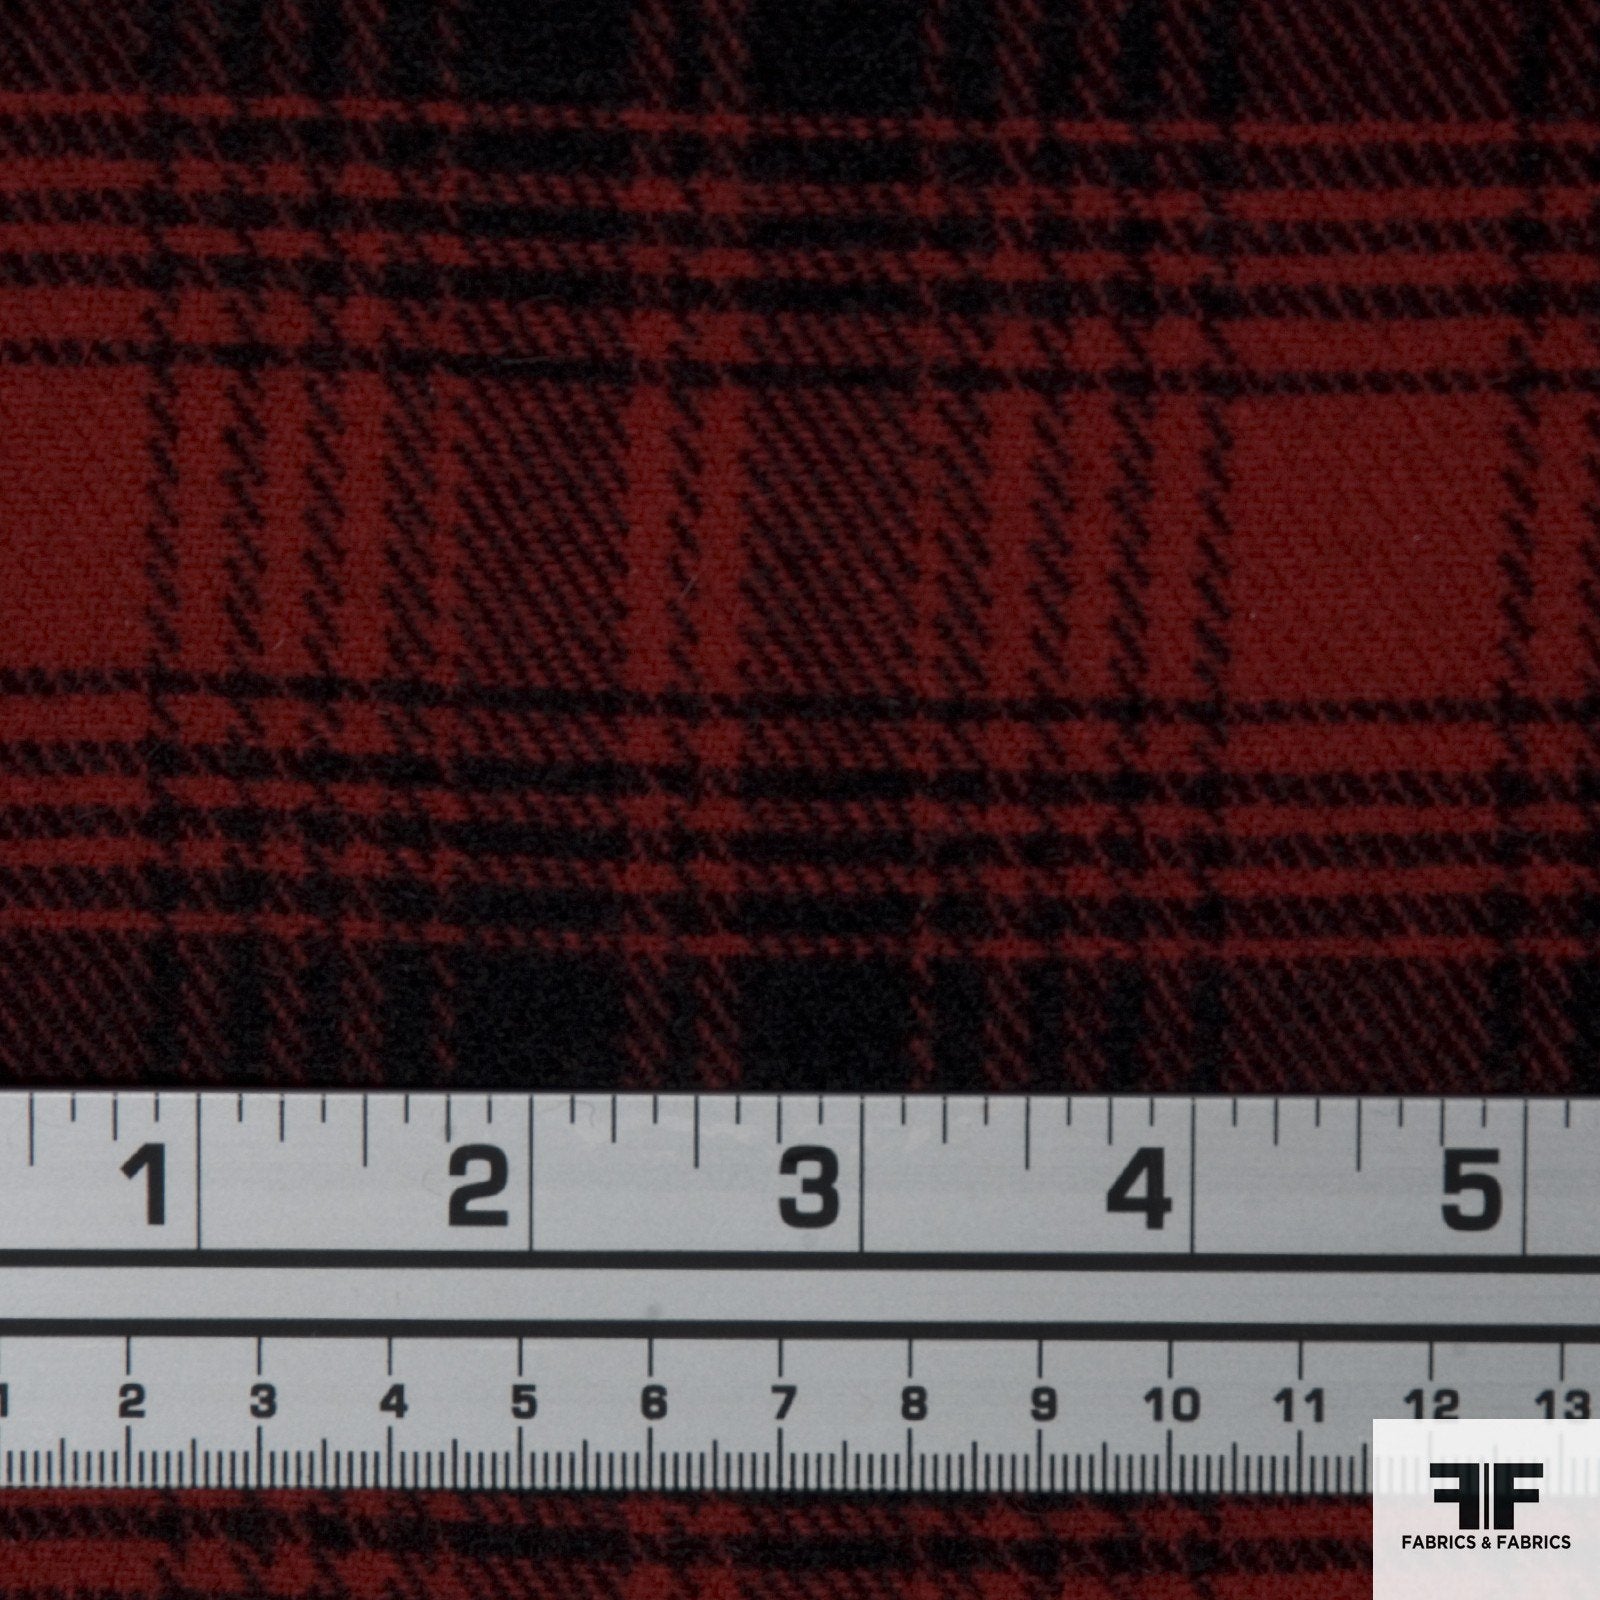 Plaid Double-Faced Wool/Cashmere Coating - Red/Black